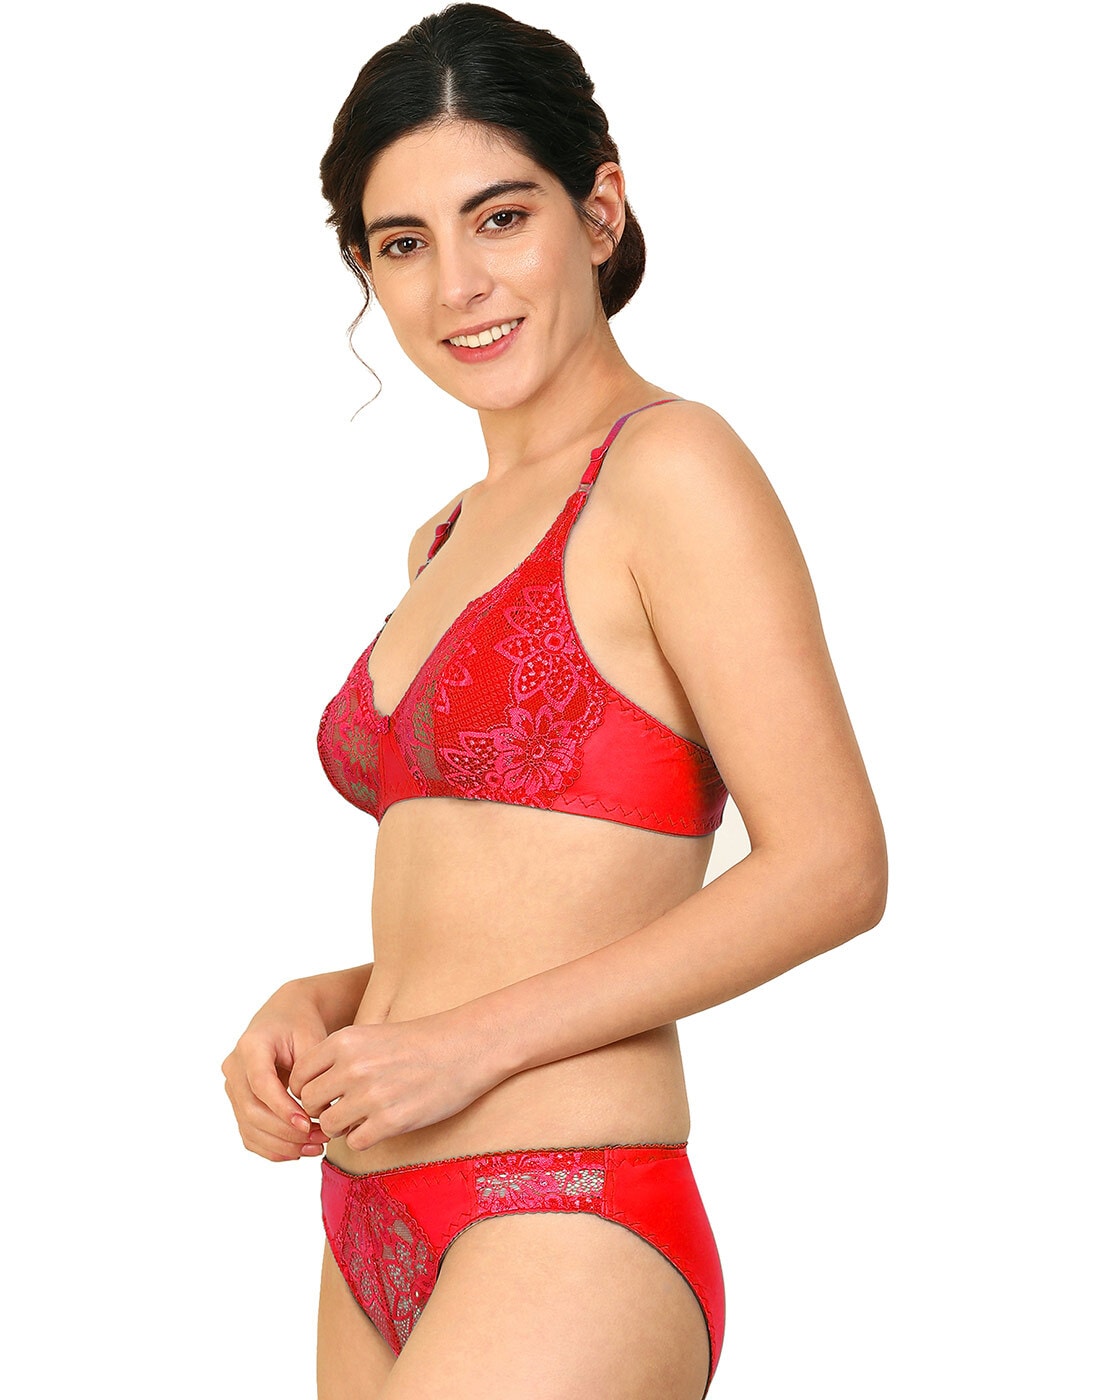 Proleaf Lingerie Set - Buy Proleaf Lingerie Set Online at Best Prices in  India